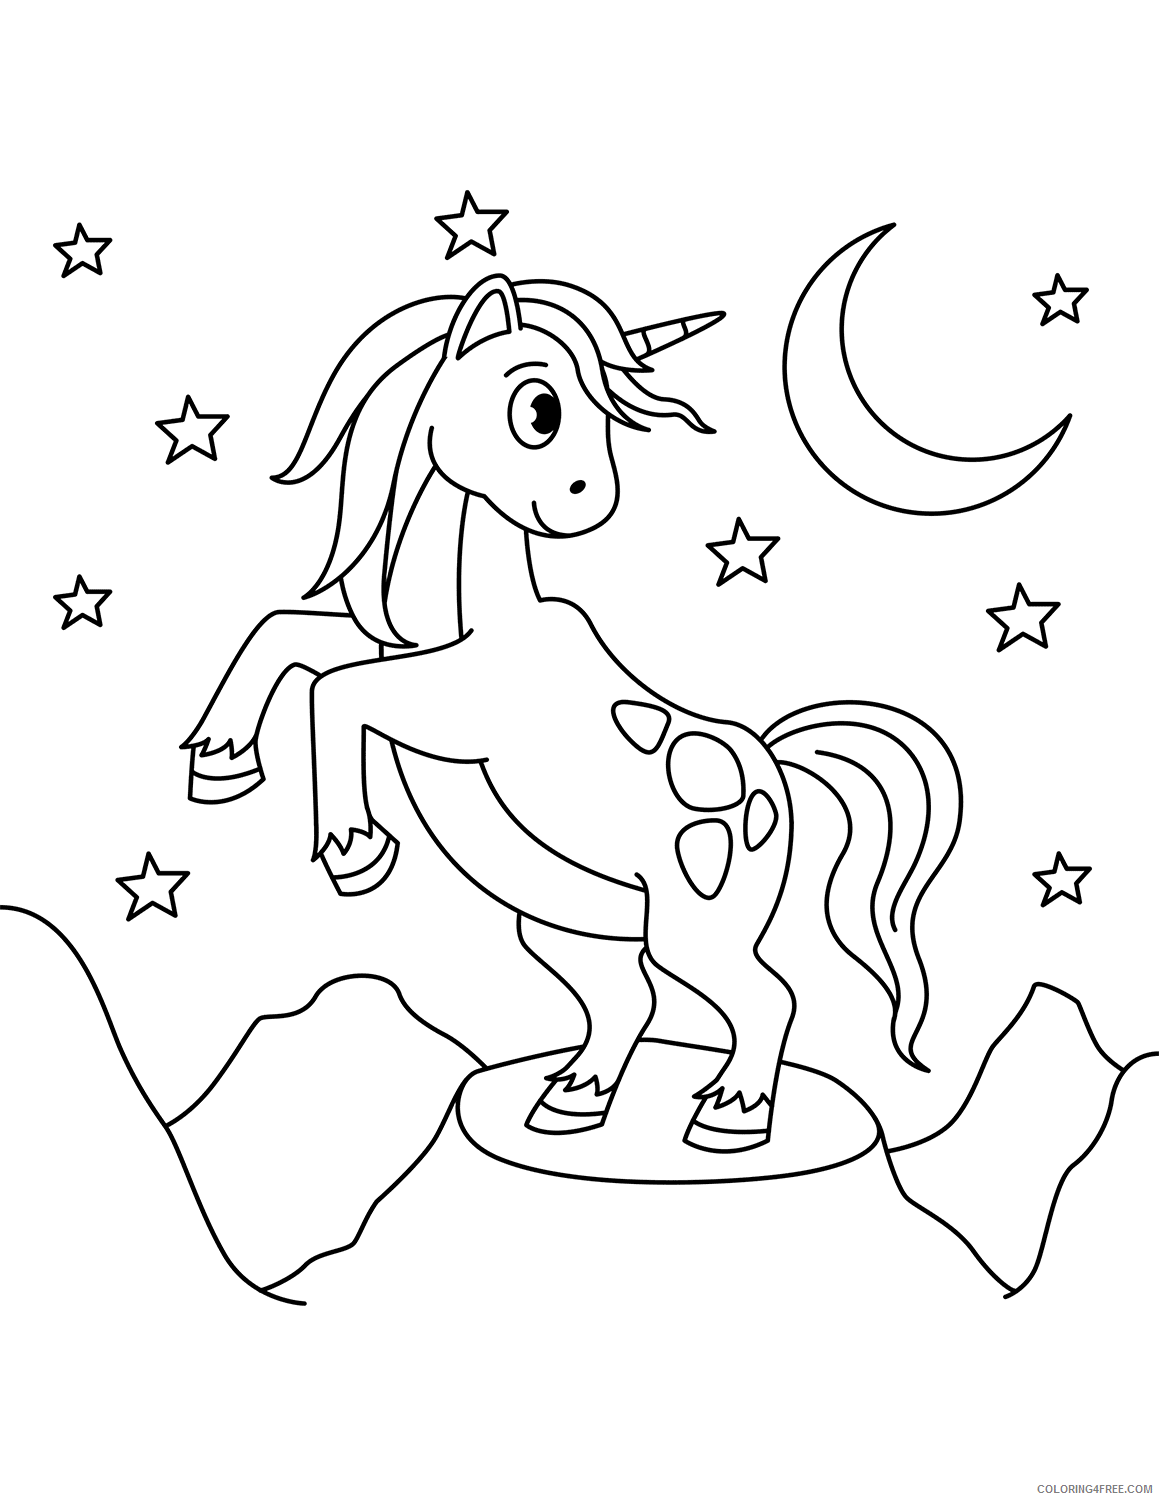 Unicorn Coloring Pages midnight unicorn Printable 2021 6044 Coloring4free